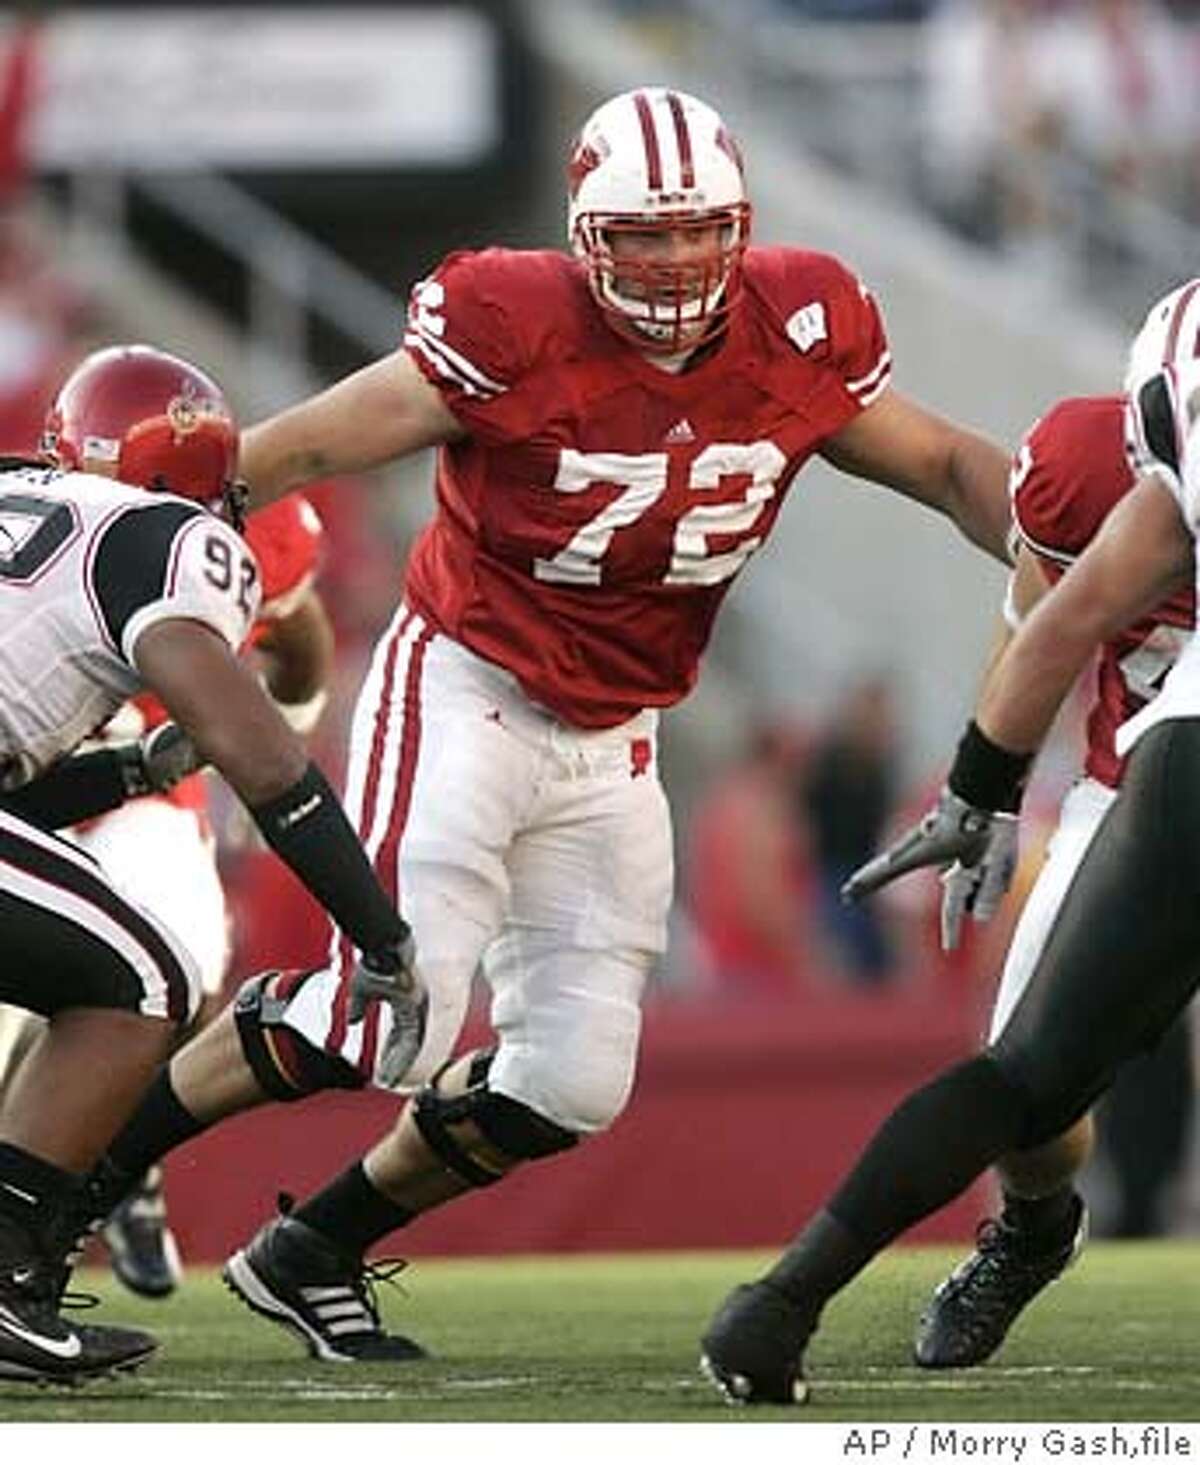 ** FILE ** Wisconsin offensive lineman Joe Thomas (72) looks to block during the second half of a football game against San Diego State Saturday, Sept. 16, 2006, in Madison, Wisc. (AP Photo/ Morry Gash,file) FOR USE AS DESIRED WITH NFL DRAFT STORIES. SEPT. 16, 2006 FILE PHOTO. EFE OUT